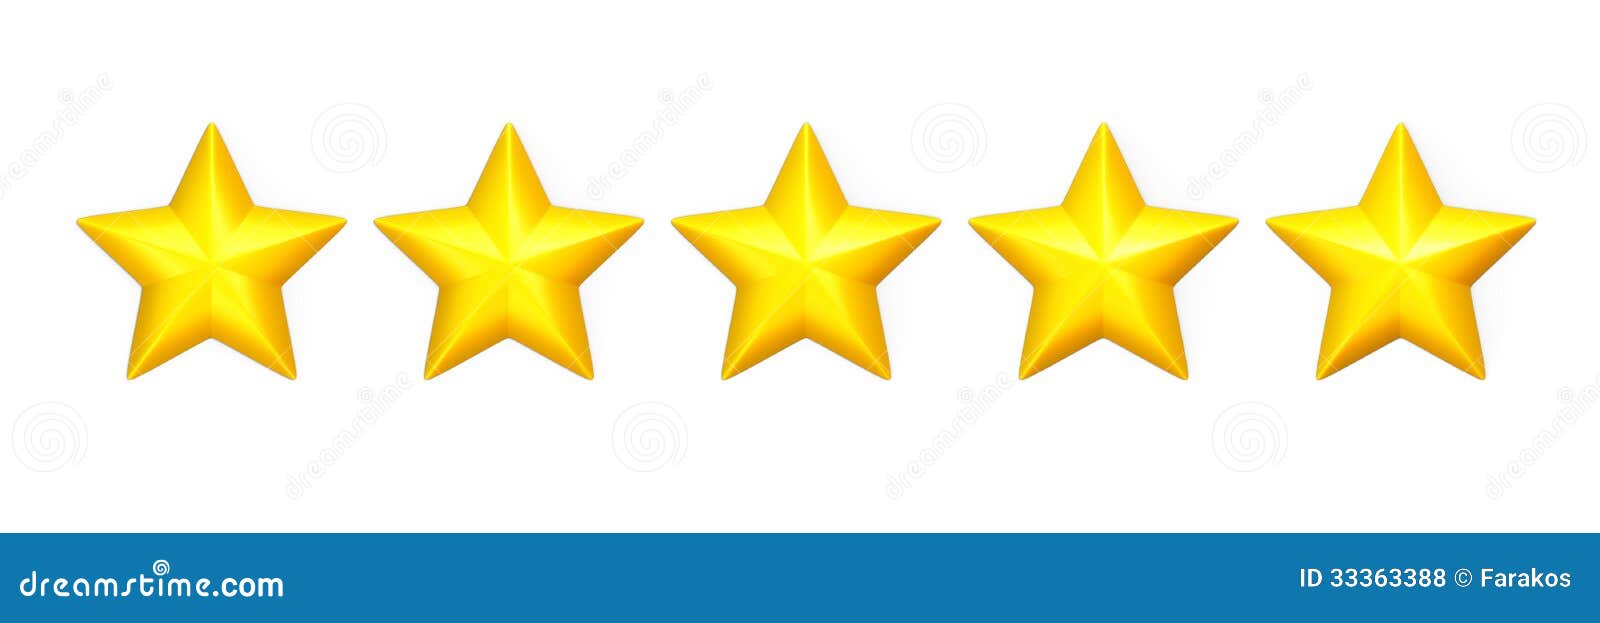 five yellow stars in a row on white